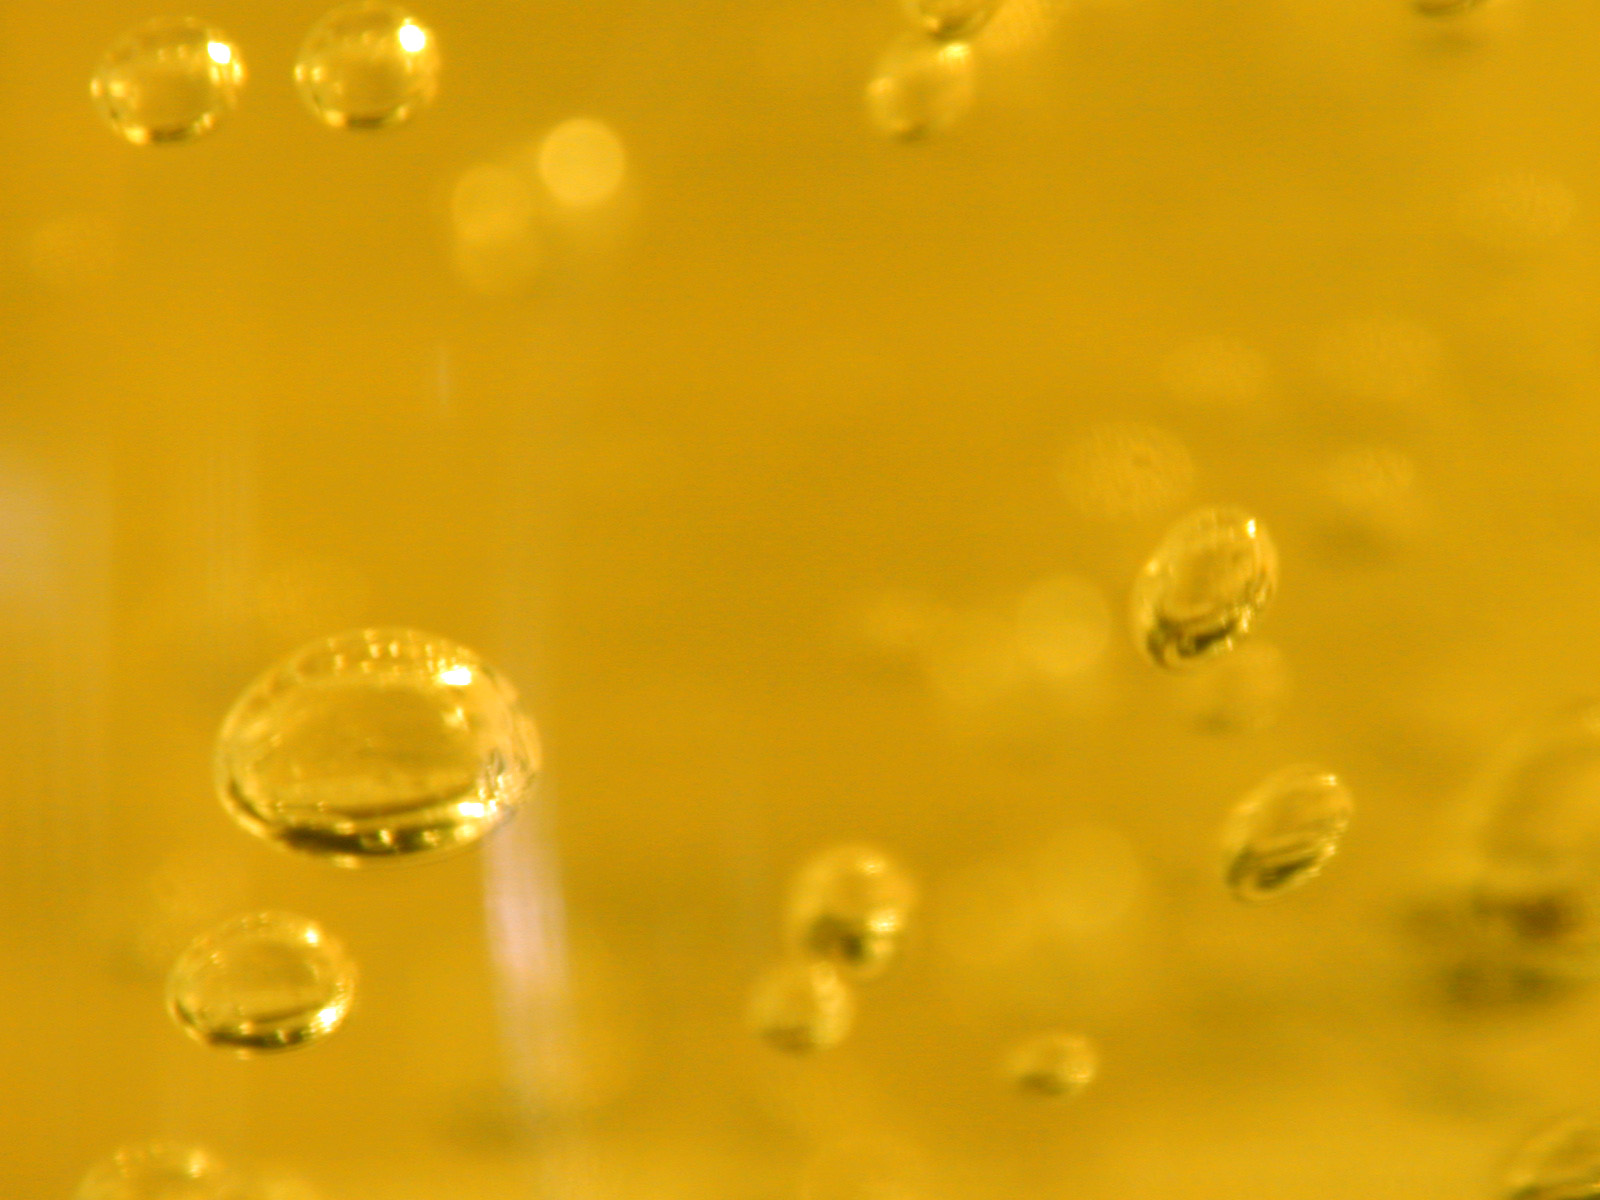 drops of water are on a yellow surface